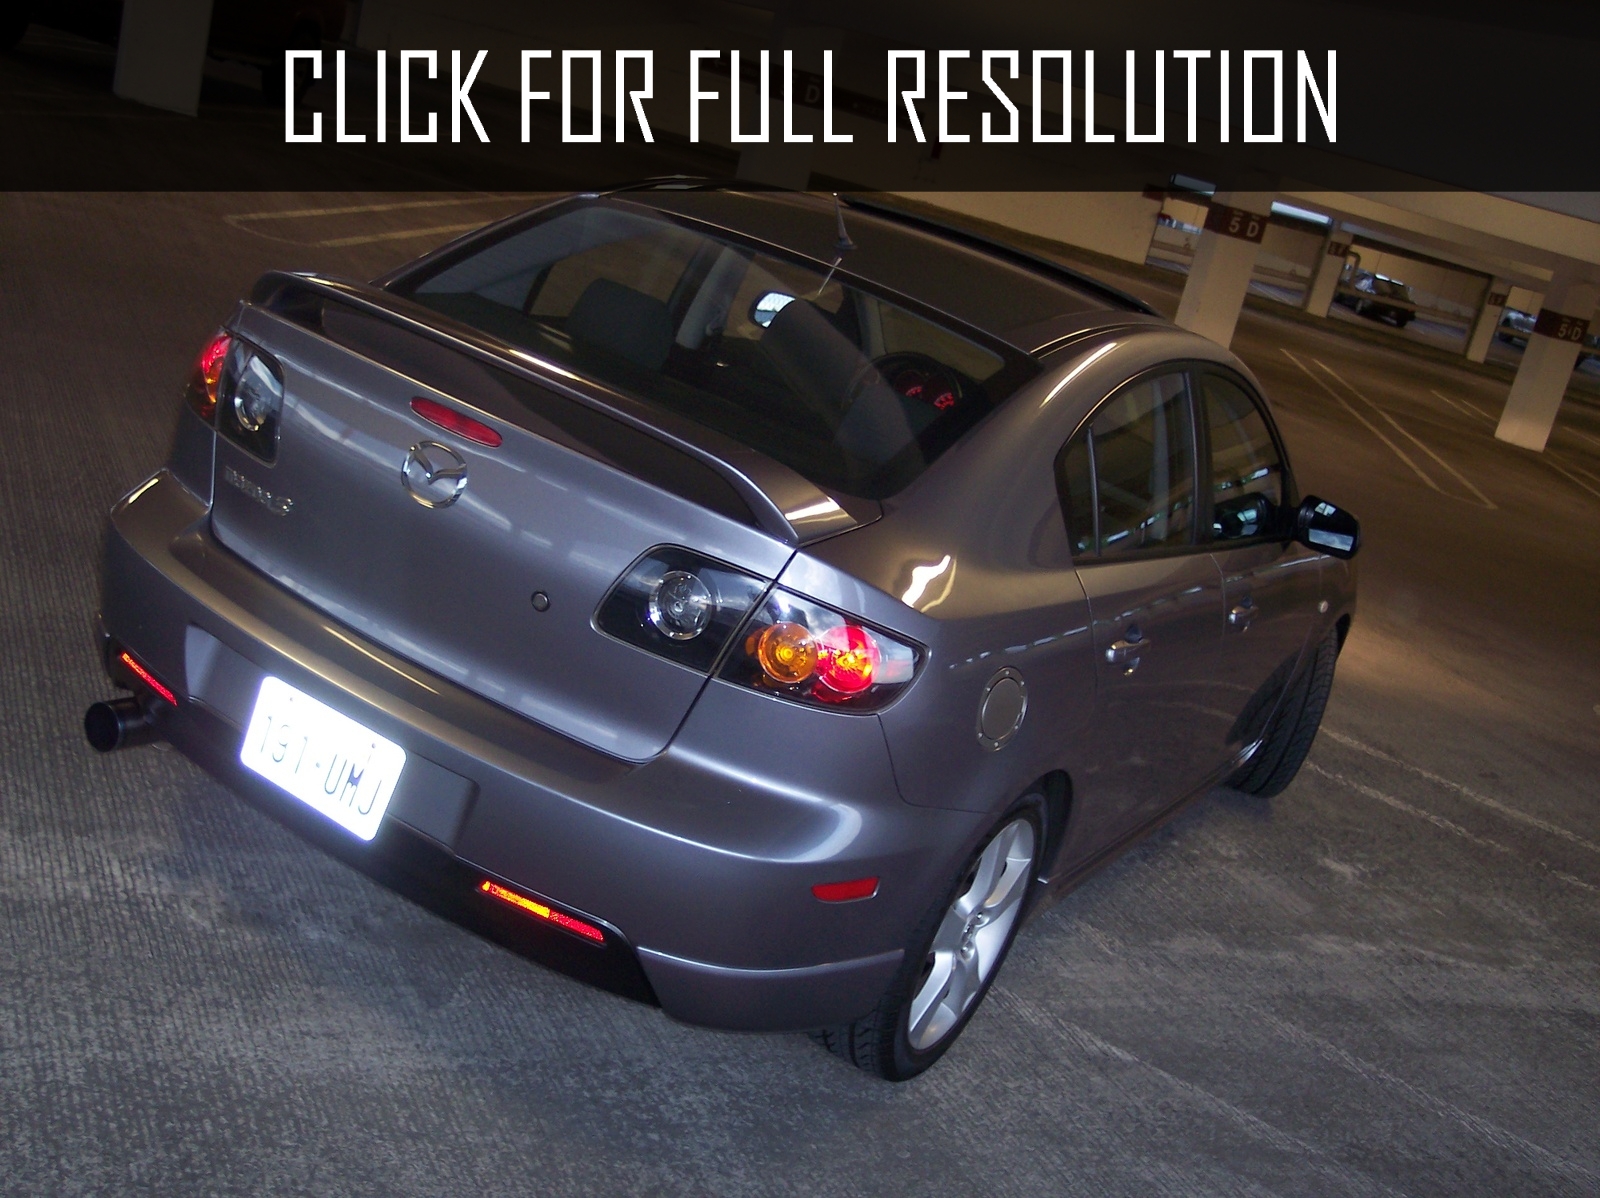 2006 Mazda 3 Sport news, reviews, msrp, ratings with